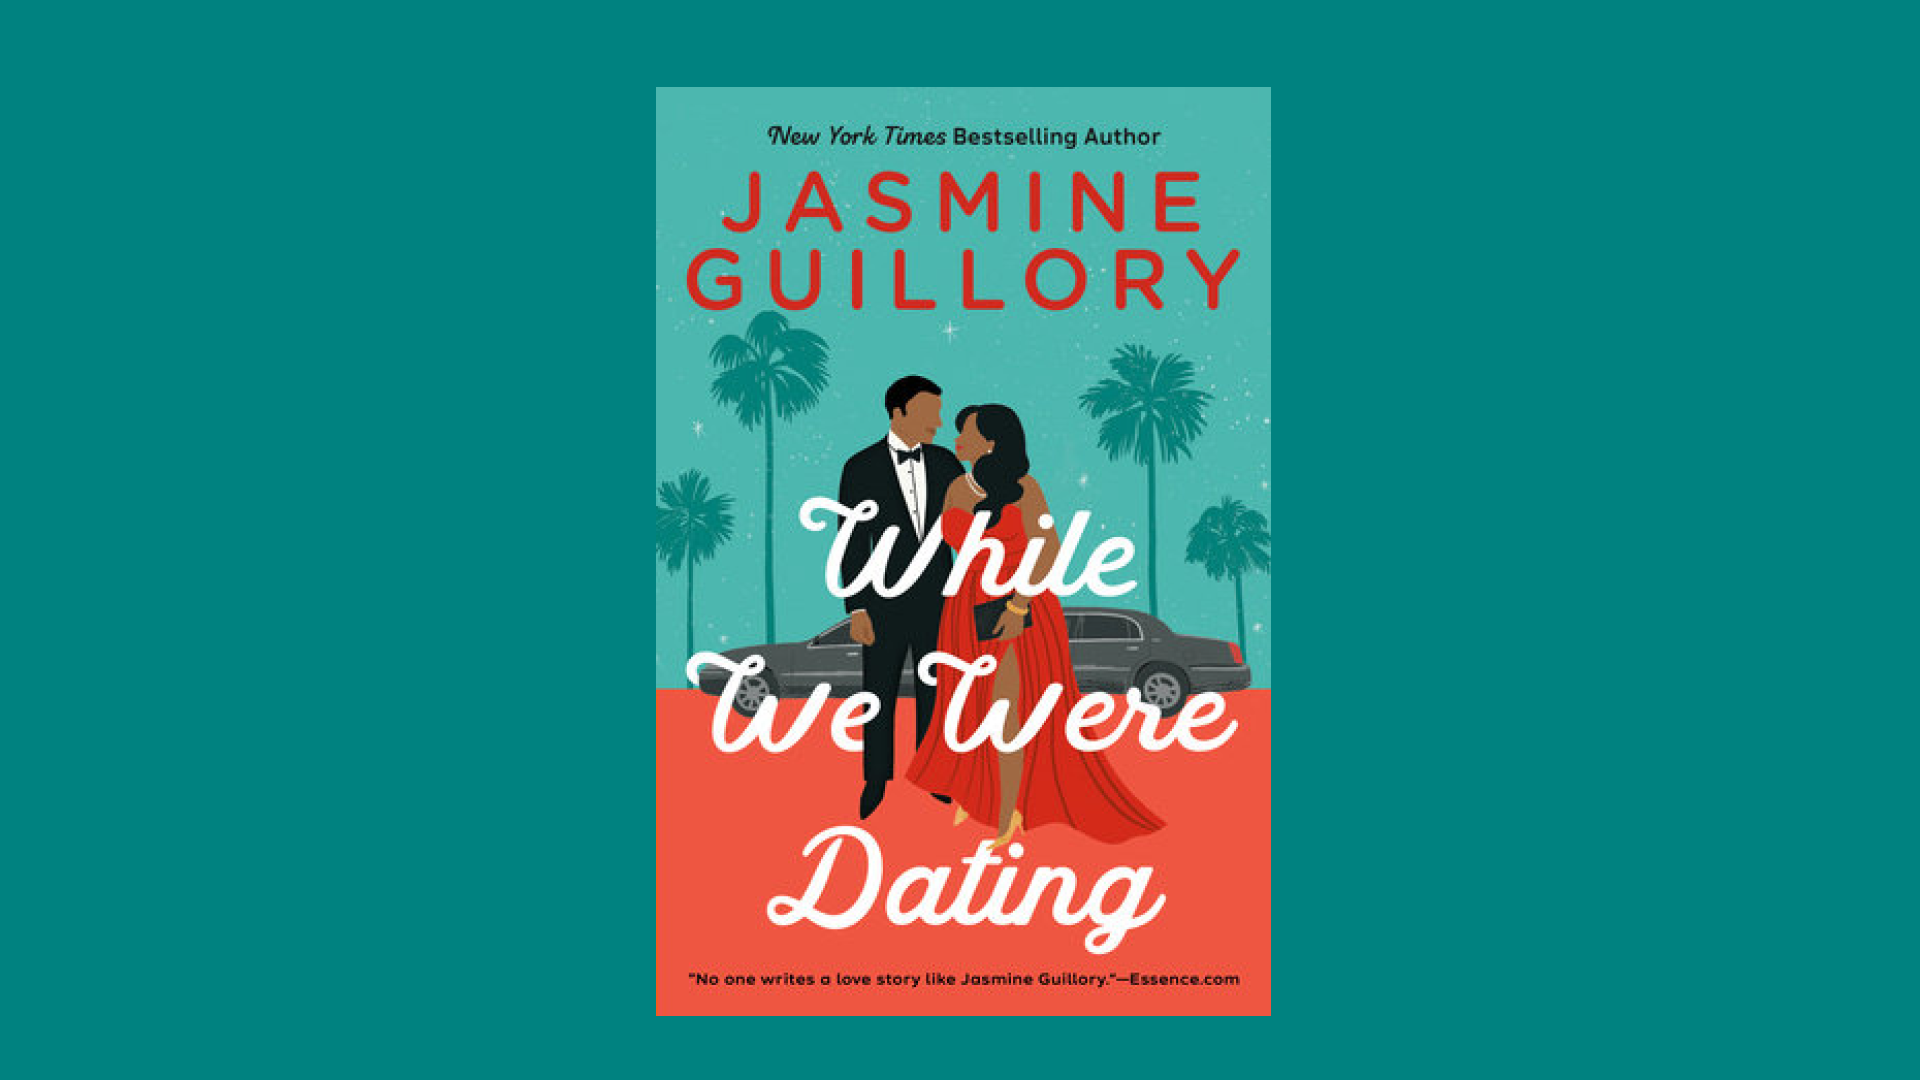 “While We Were Dating” by Jasmine Guillory 